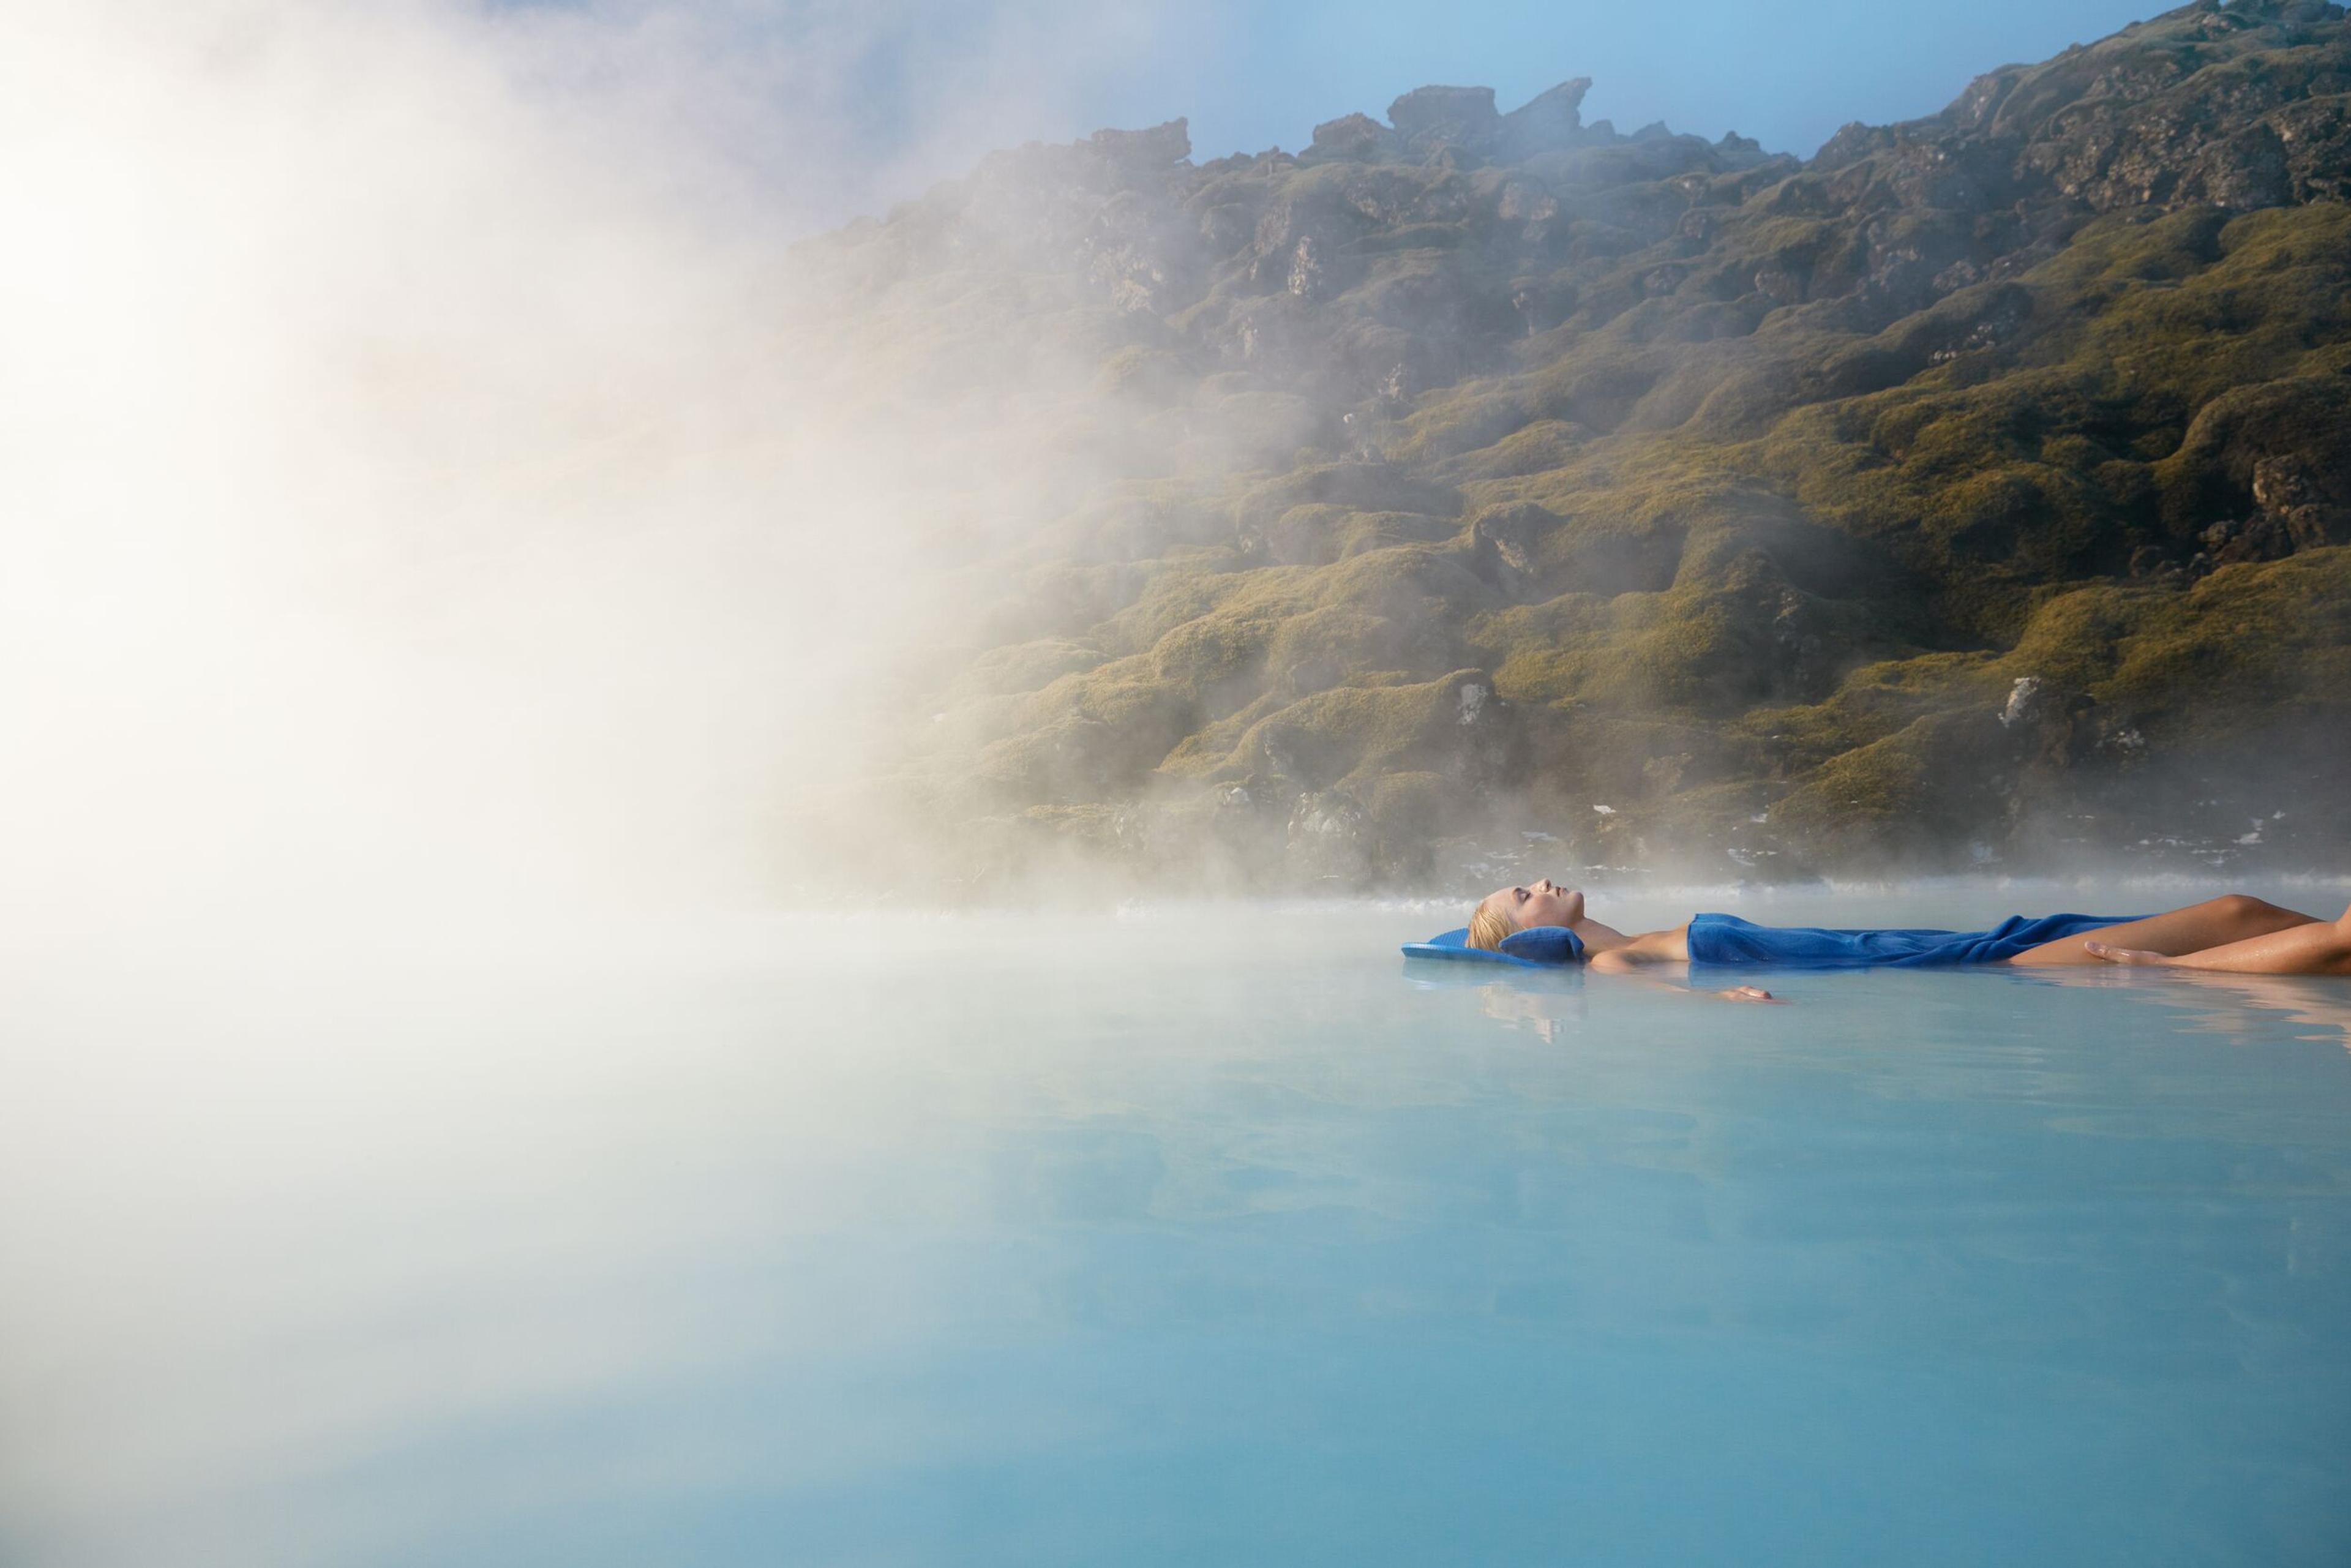 A woman draped in a blue towel floats serenely in the Blue Lagoon, enveloped by rising steam, with verdant moss-covered rocks in the backdrop